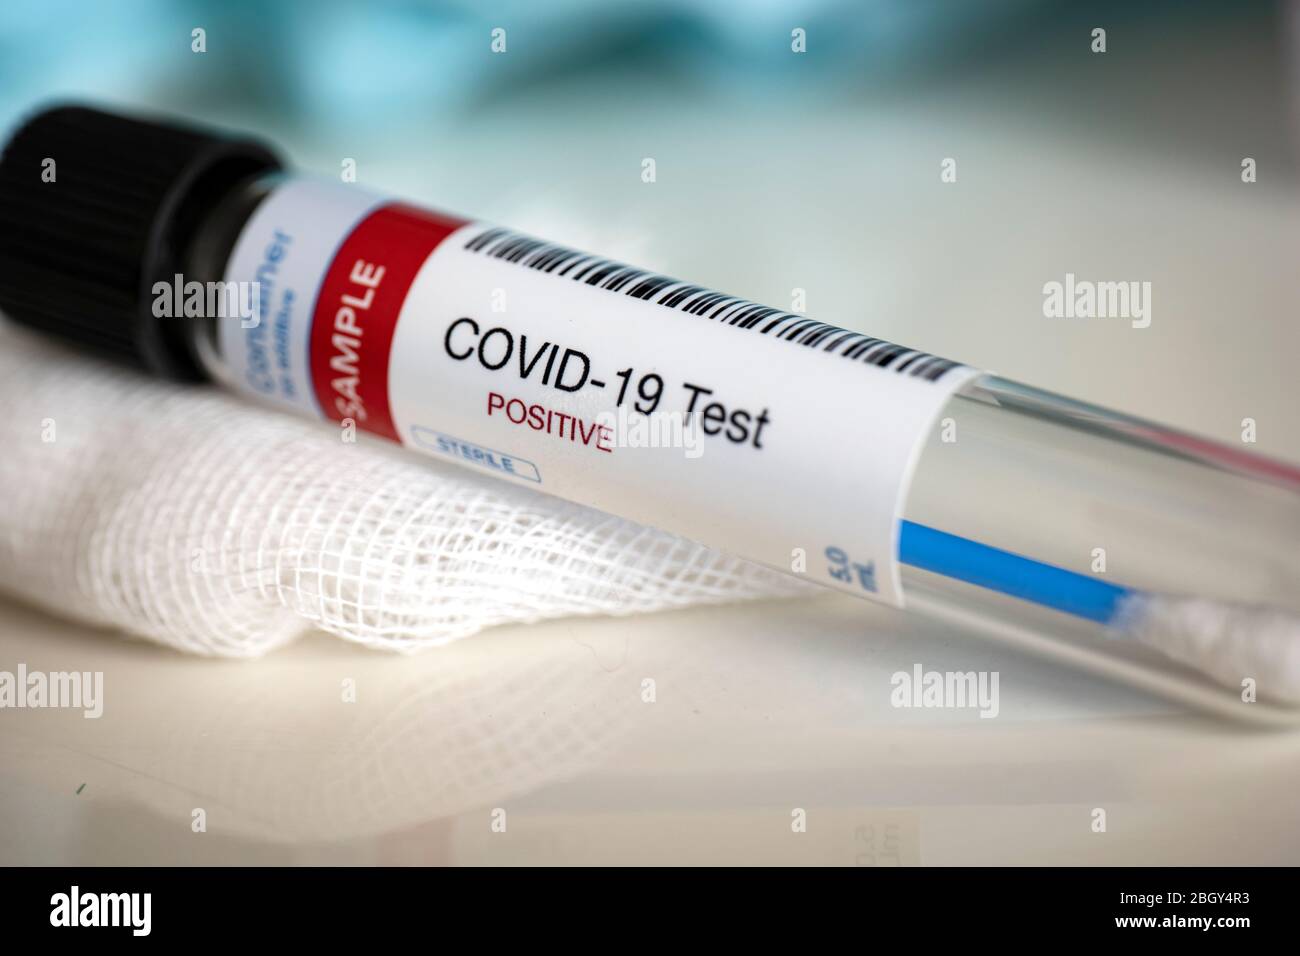 Testing for presence of coronavirus. Tube containing a swab sample that has tested positive for COVID-19. Stock Photo